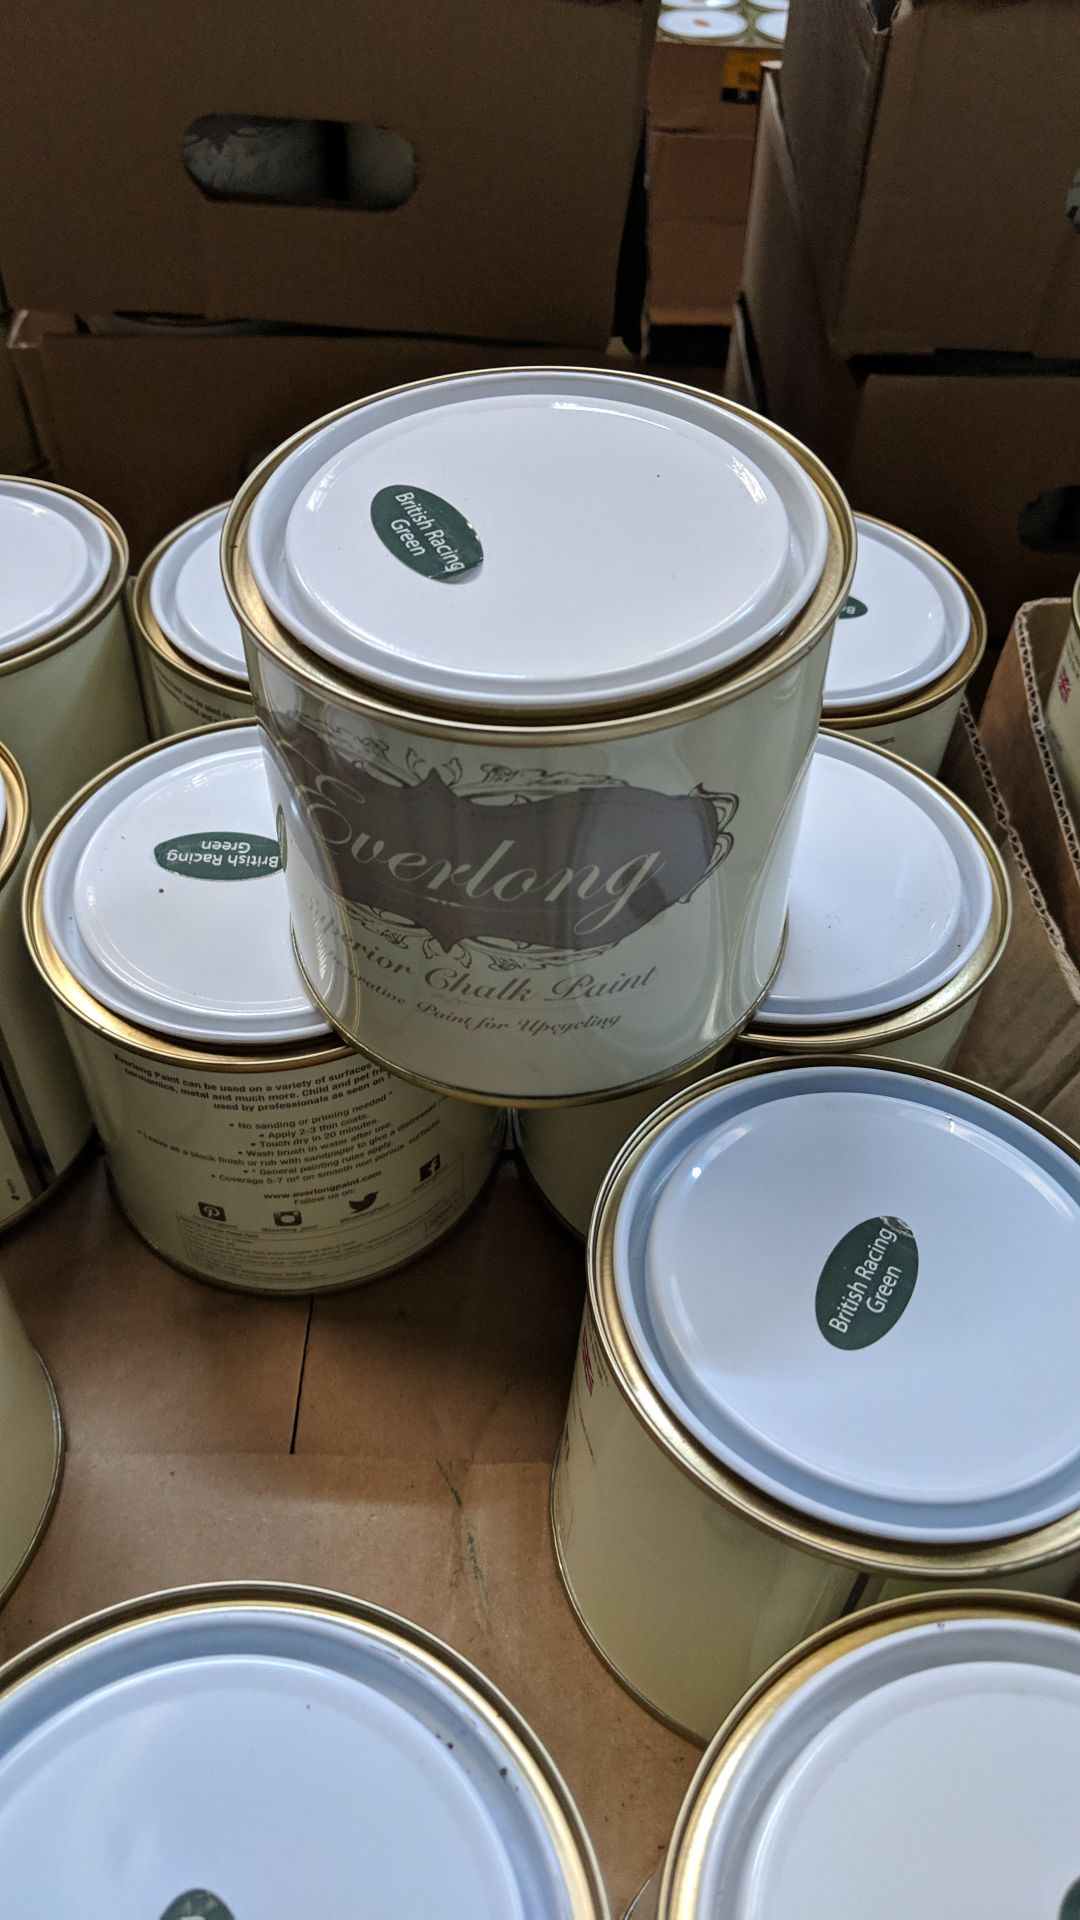 72 off 500ml tins of Everlong branded superior chalk paint - colour British Racing Green This lot is - Image 2 of 2